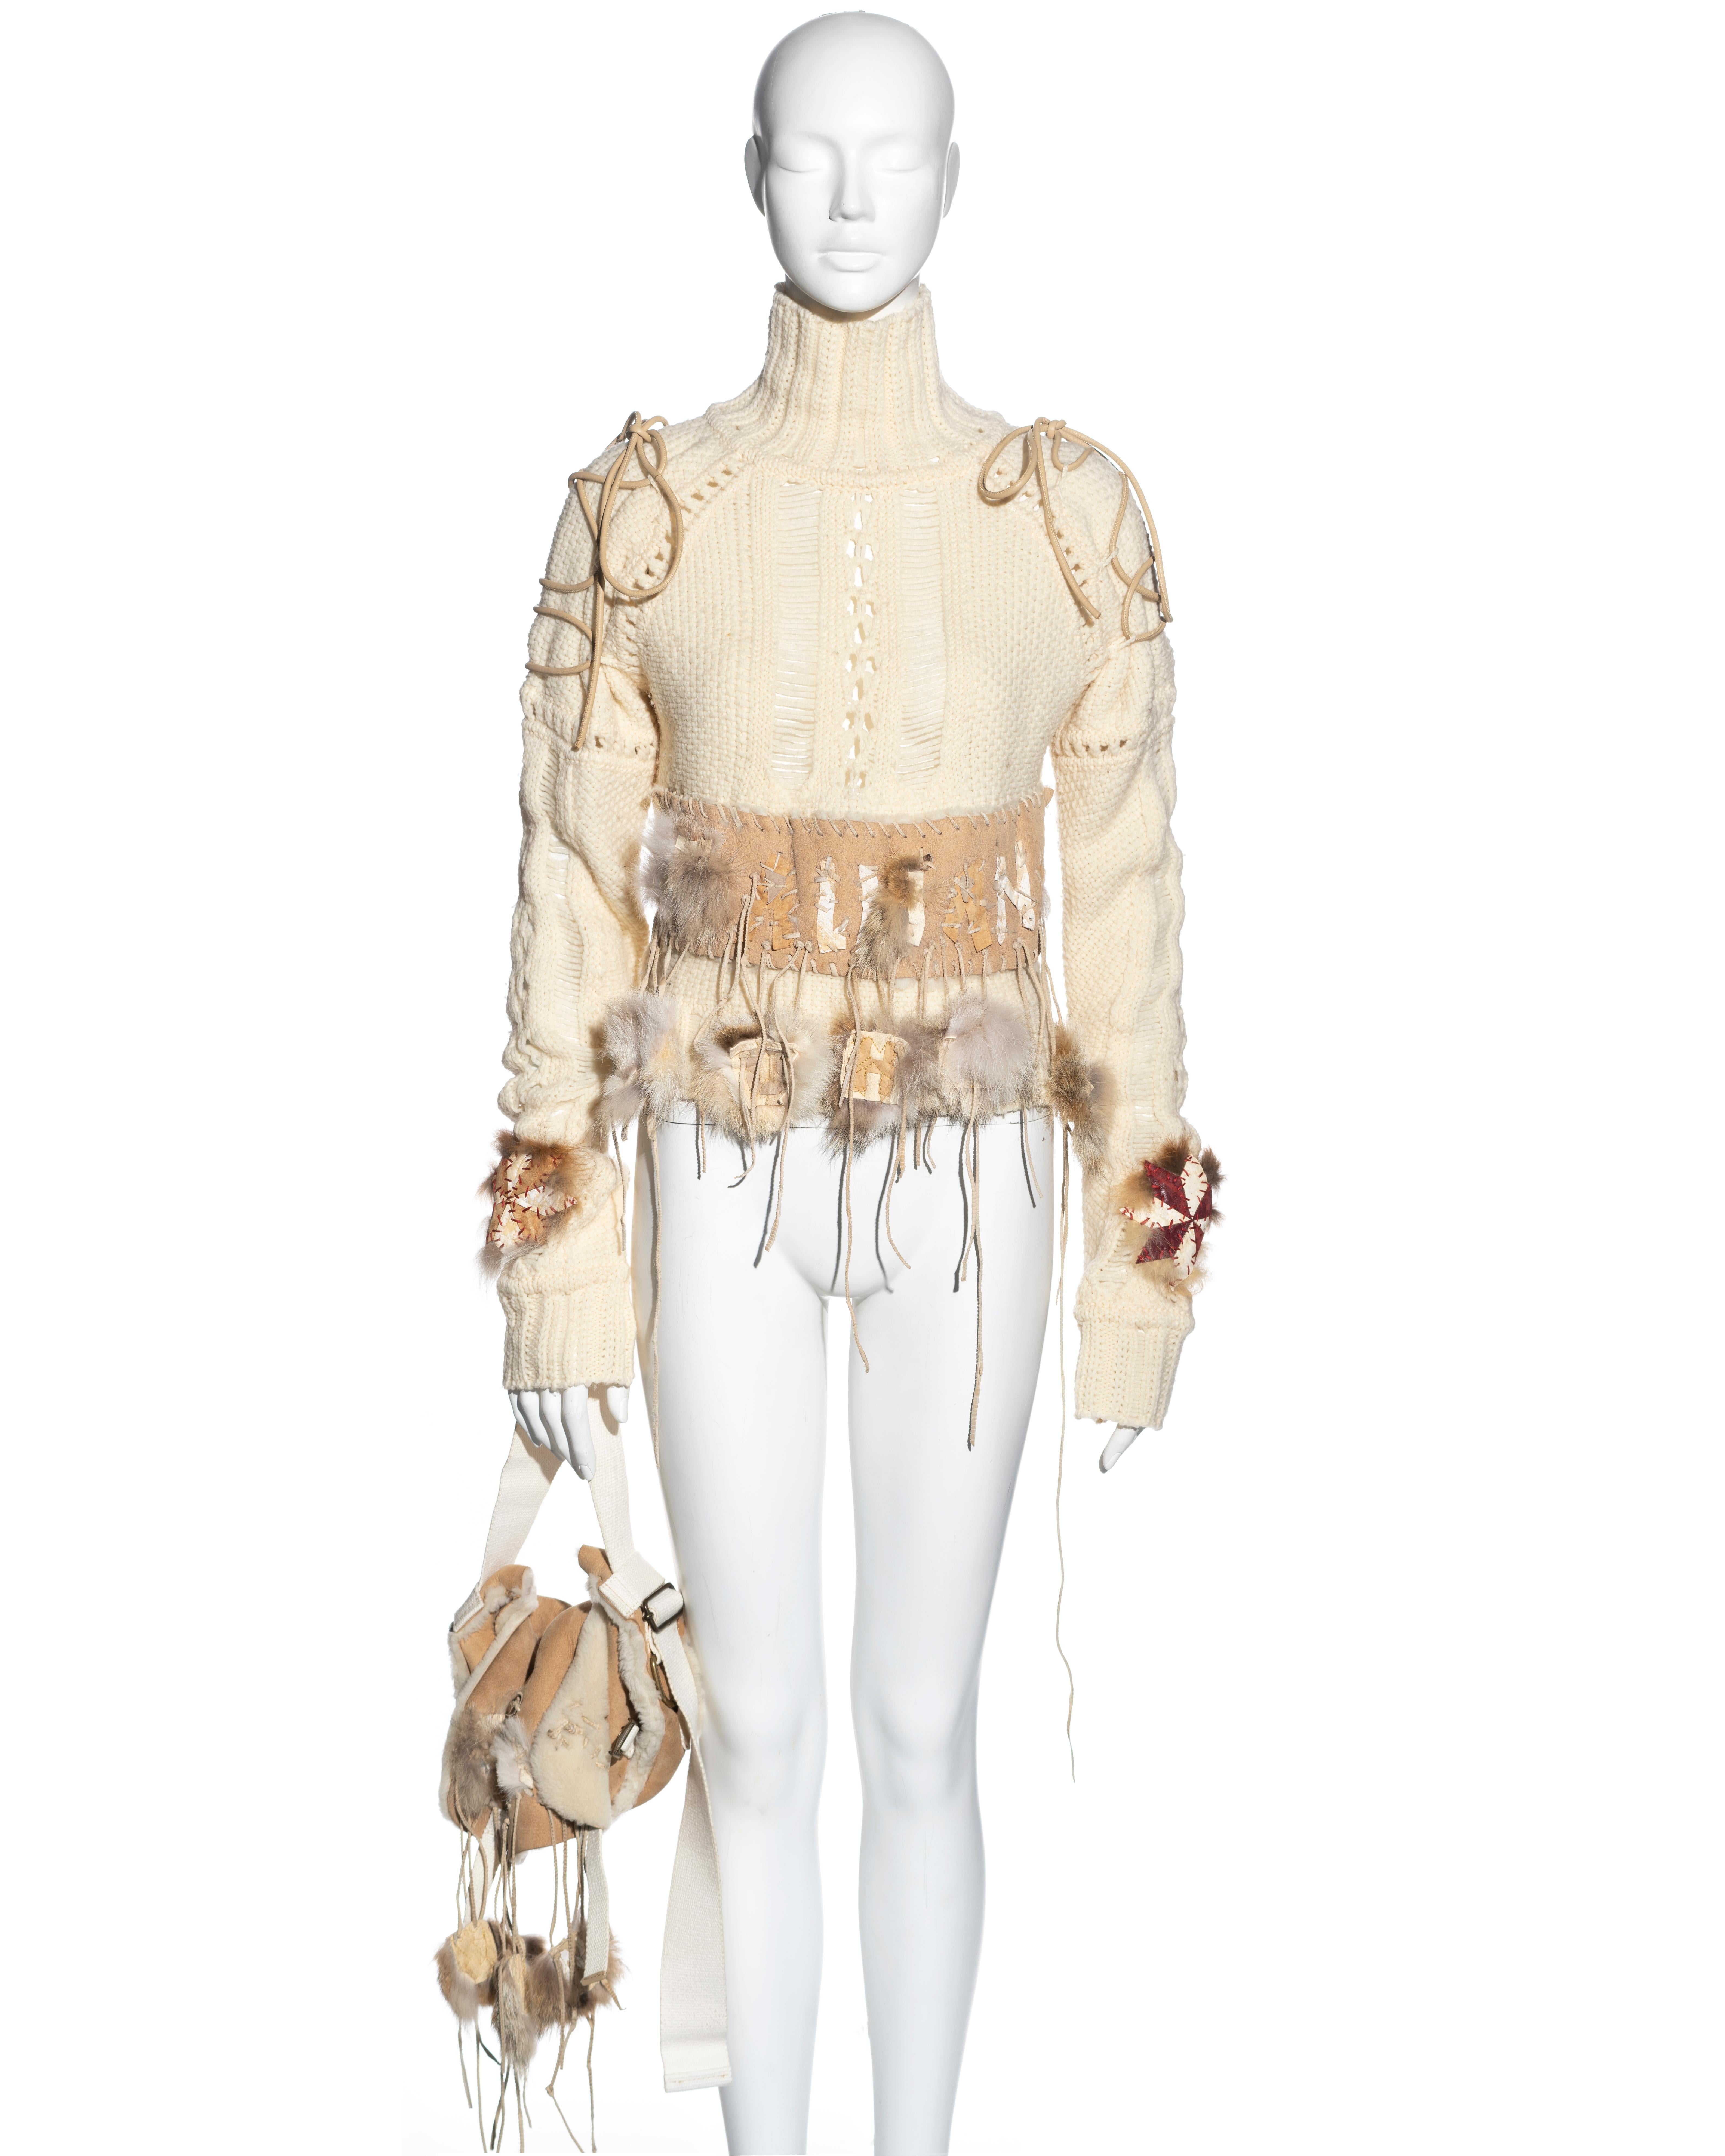 ▪ John Galliano sweater and bag set
▪ Sold by One of a Kind Archive
▪ Cream knitted wool turtleneck sweater 
▪ Leather lacing at the shoulders 
▪ Patchwork leather and suede appliqués 
▪ Matching shearling bag with canvas shoulder strap 
▪ Size: